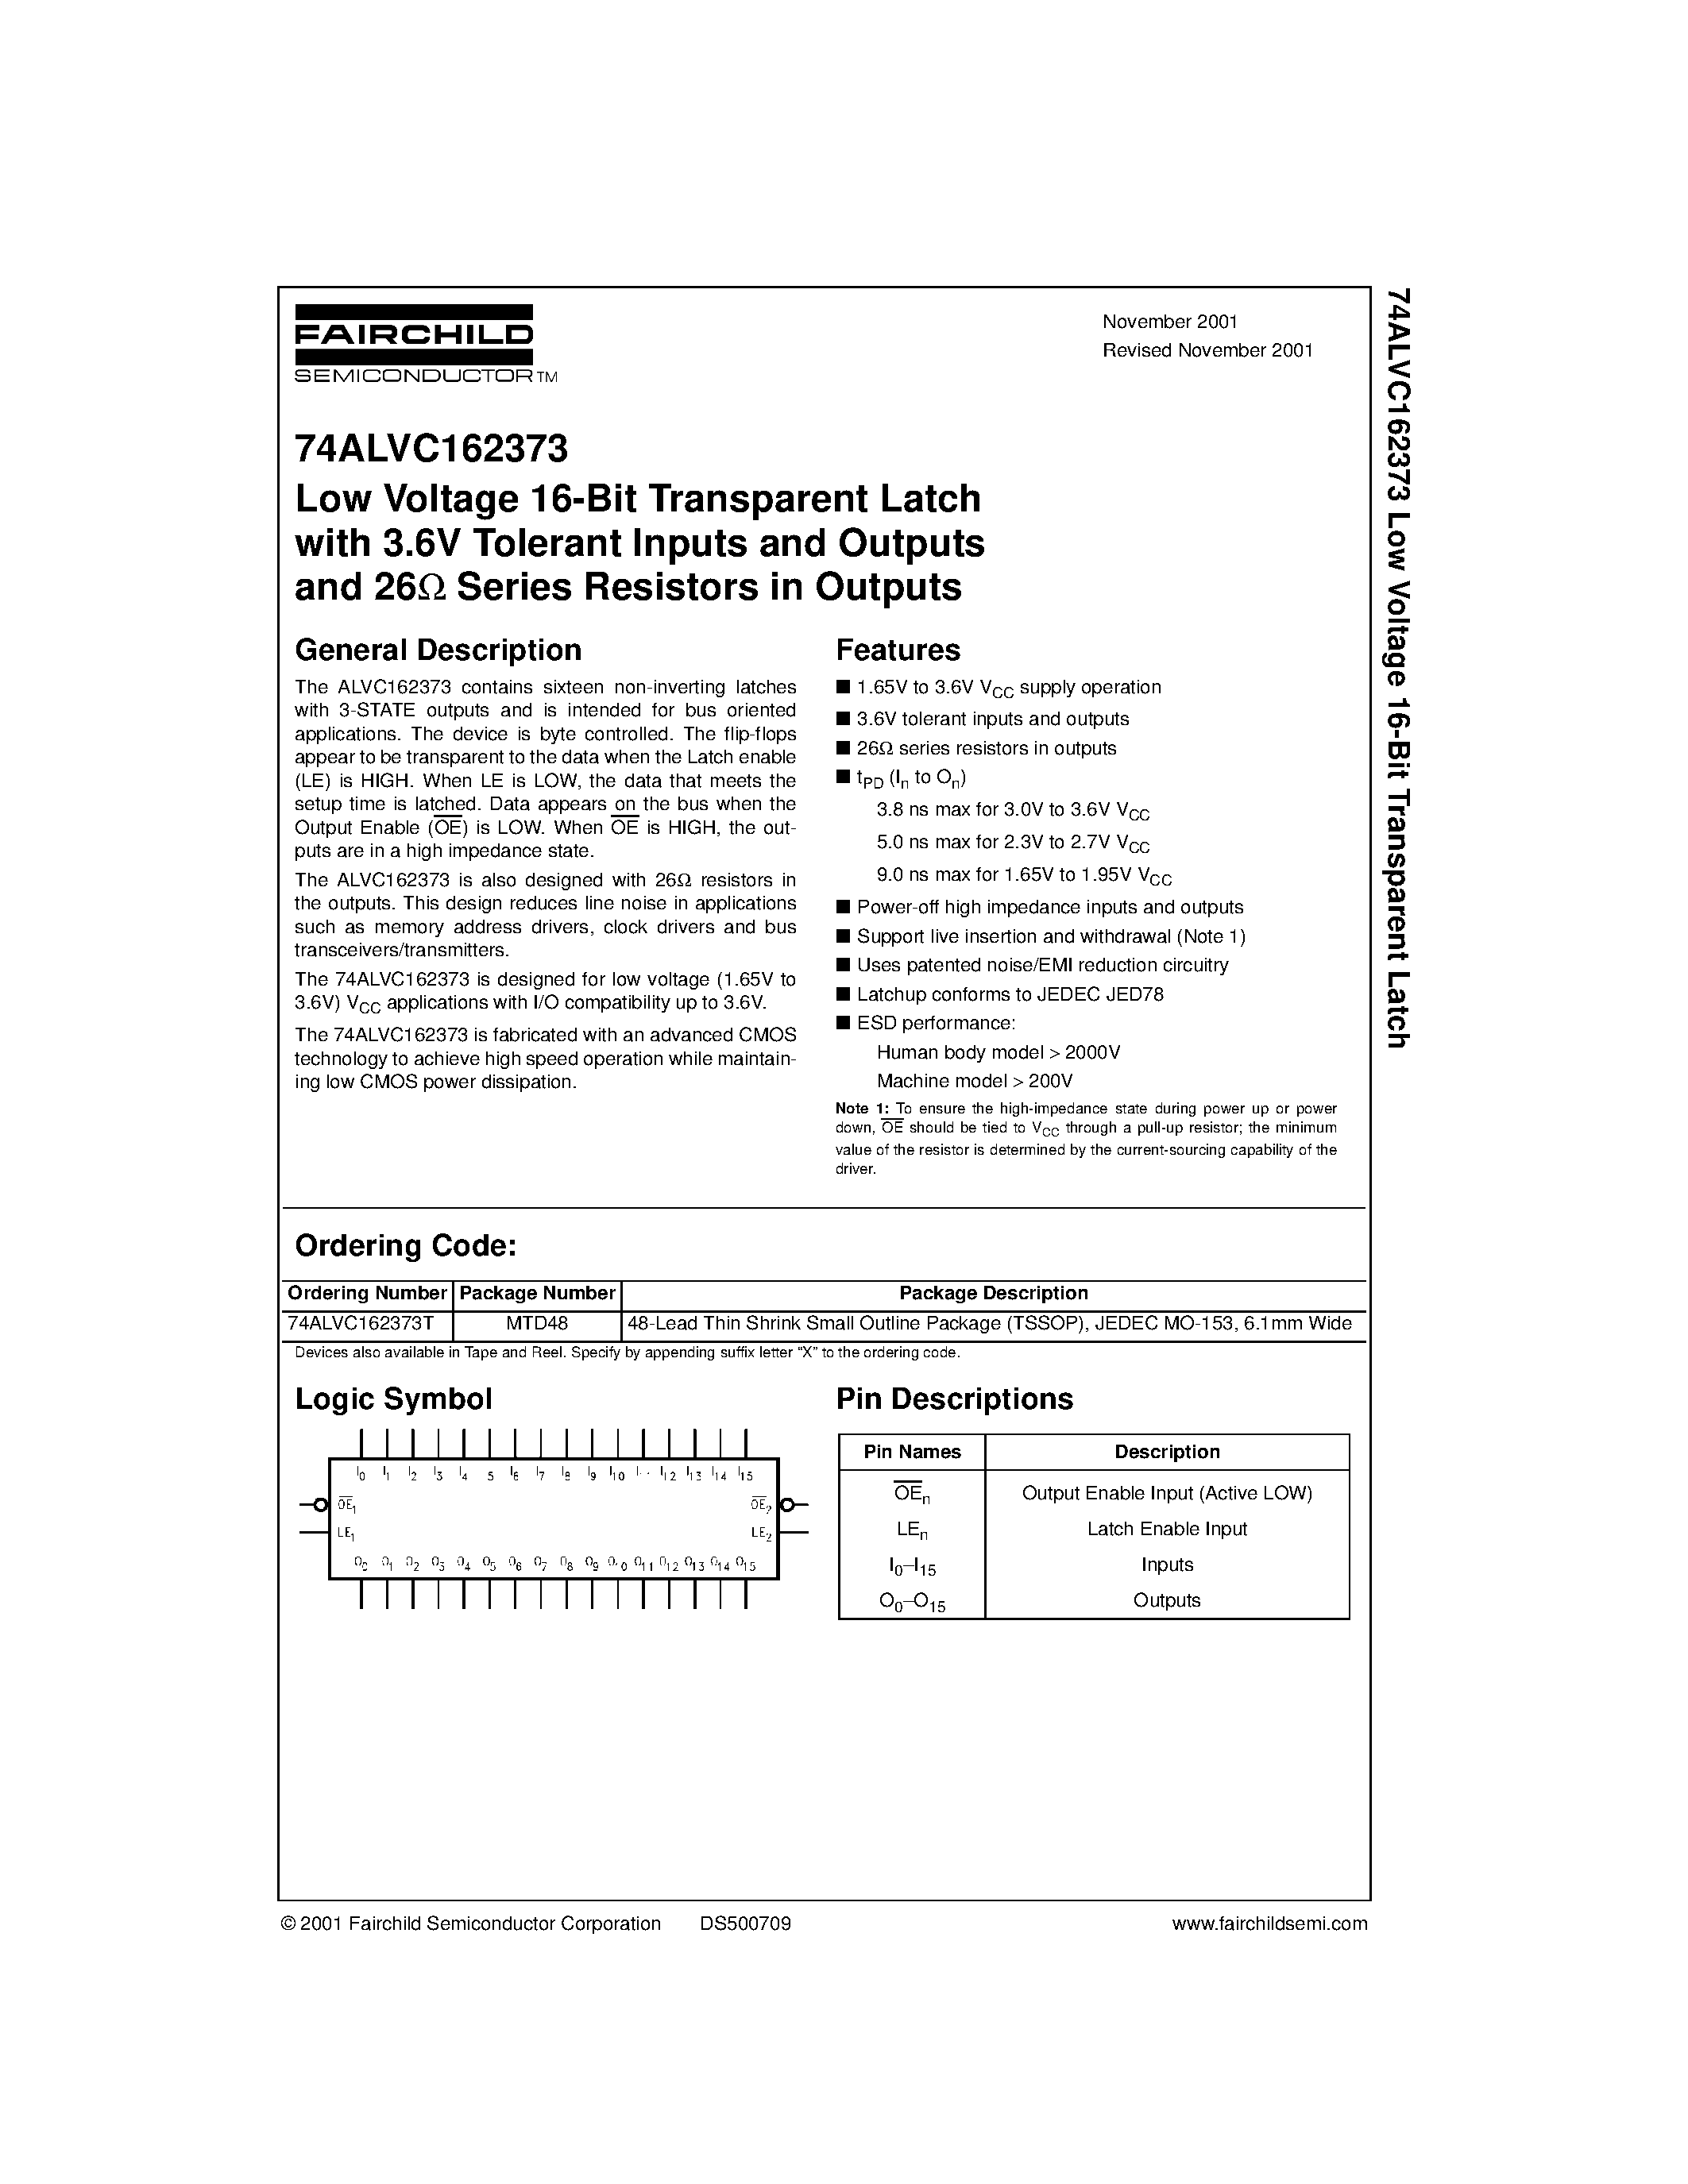 Datasheet 74ALVC162373 - Low Voltage 16-Bit Transparent Latch with 3.6V Tolerant Inputs and Outputs and 26 Series Resistors in Outputs page 1